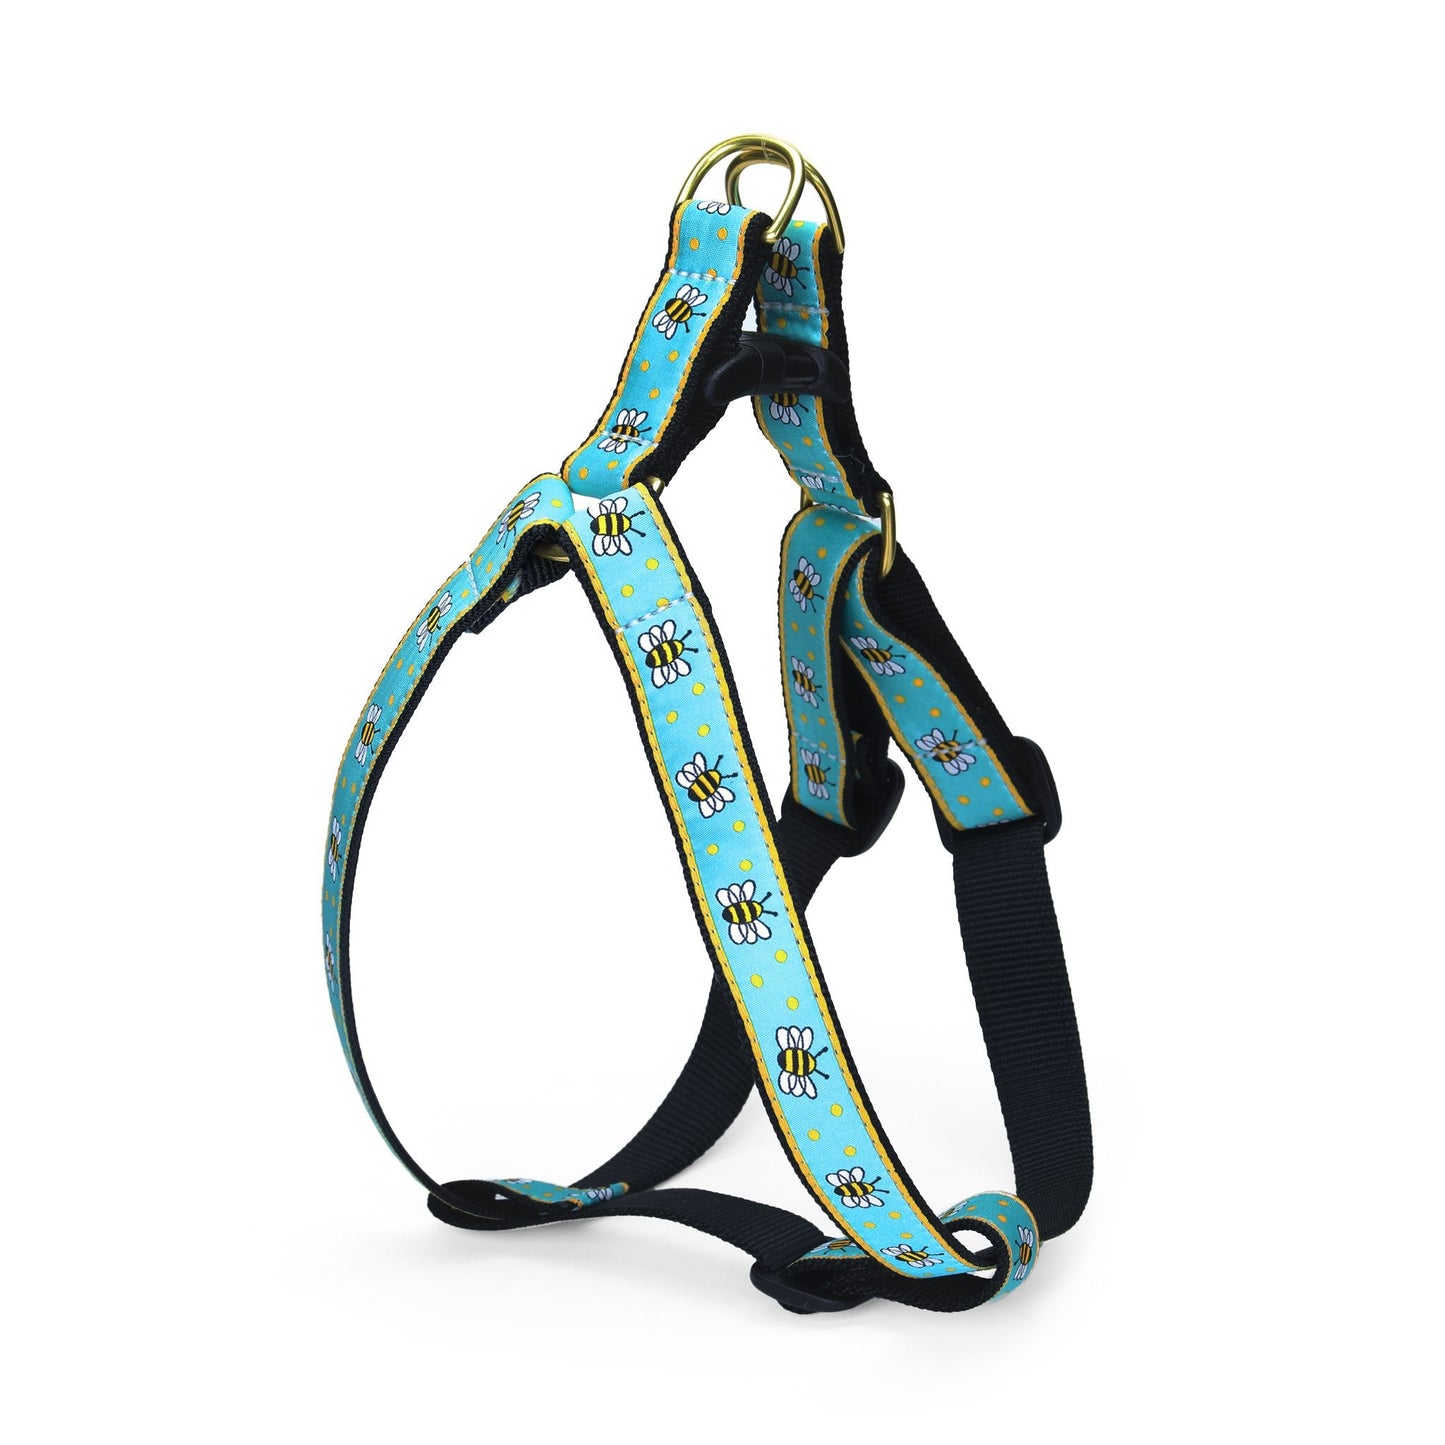 Bee Dog Harness by Up Country